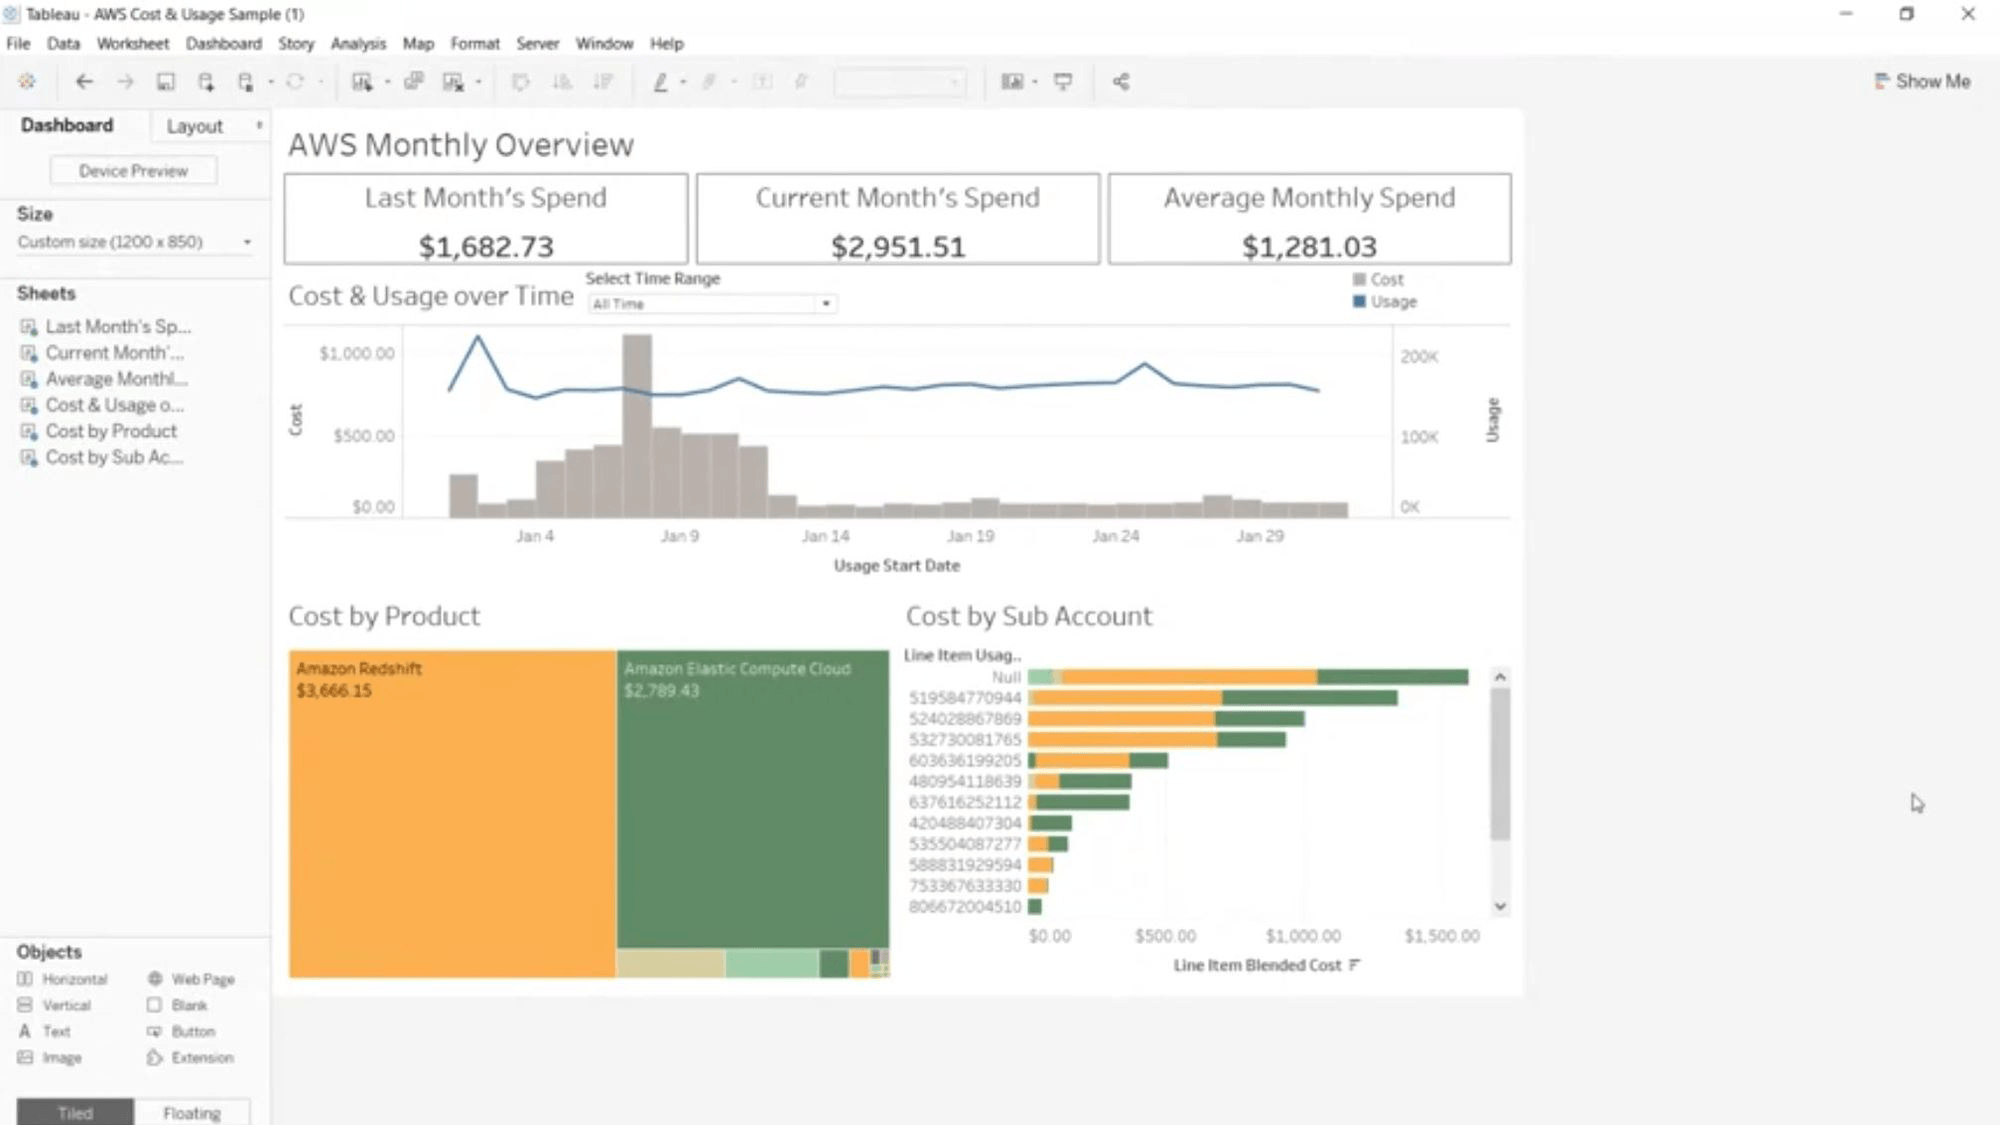 Navigate to Optimising your cloud investments with Tableau